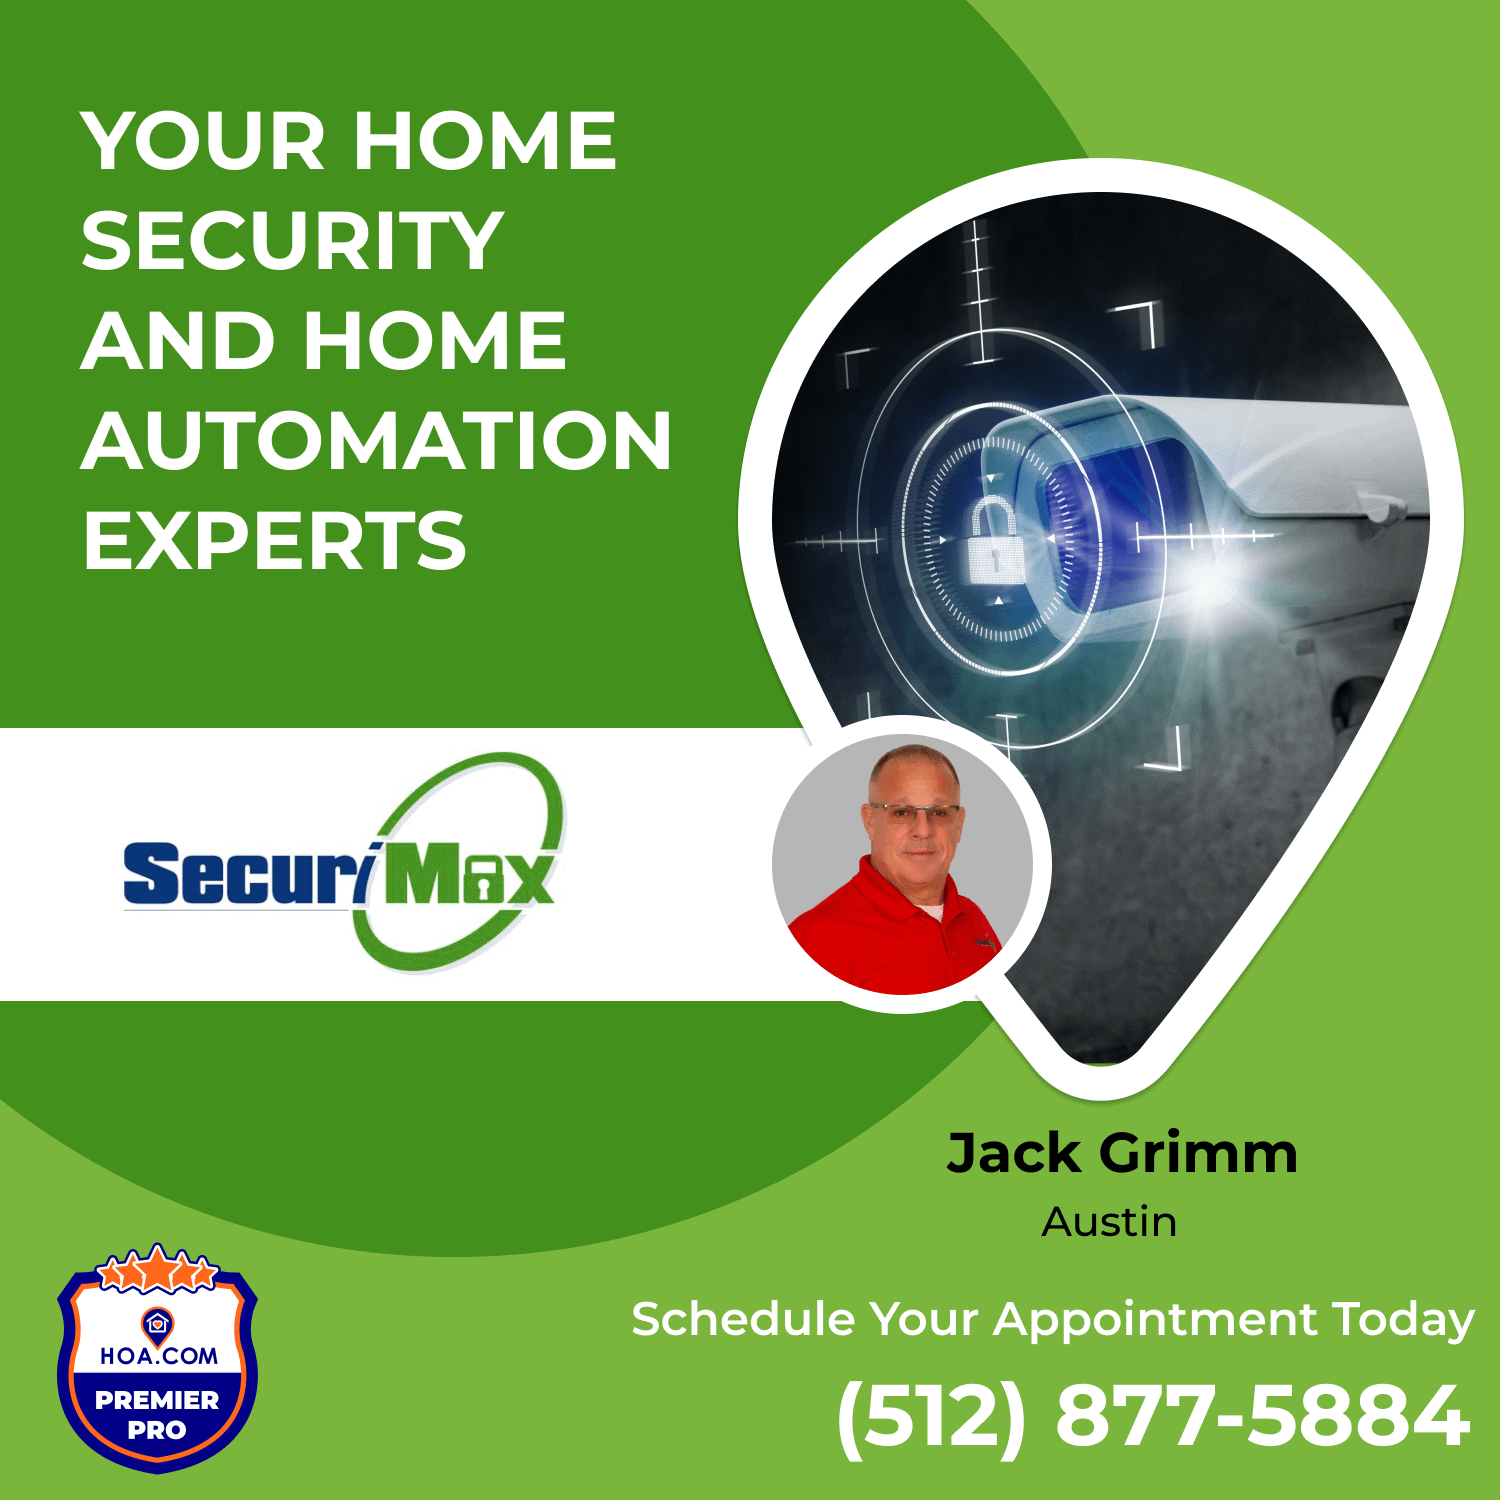 Your Home Security And Home Automation Experts